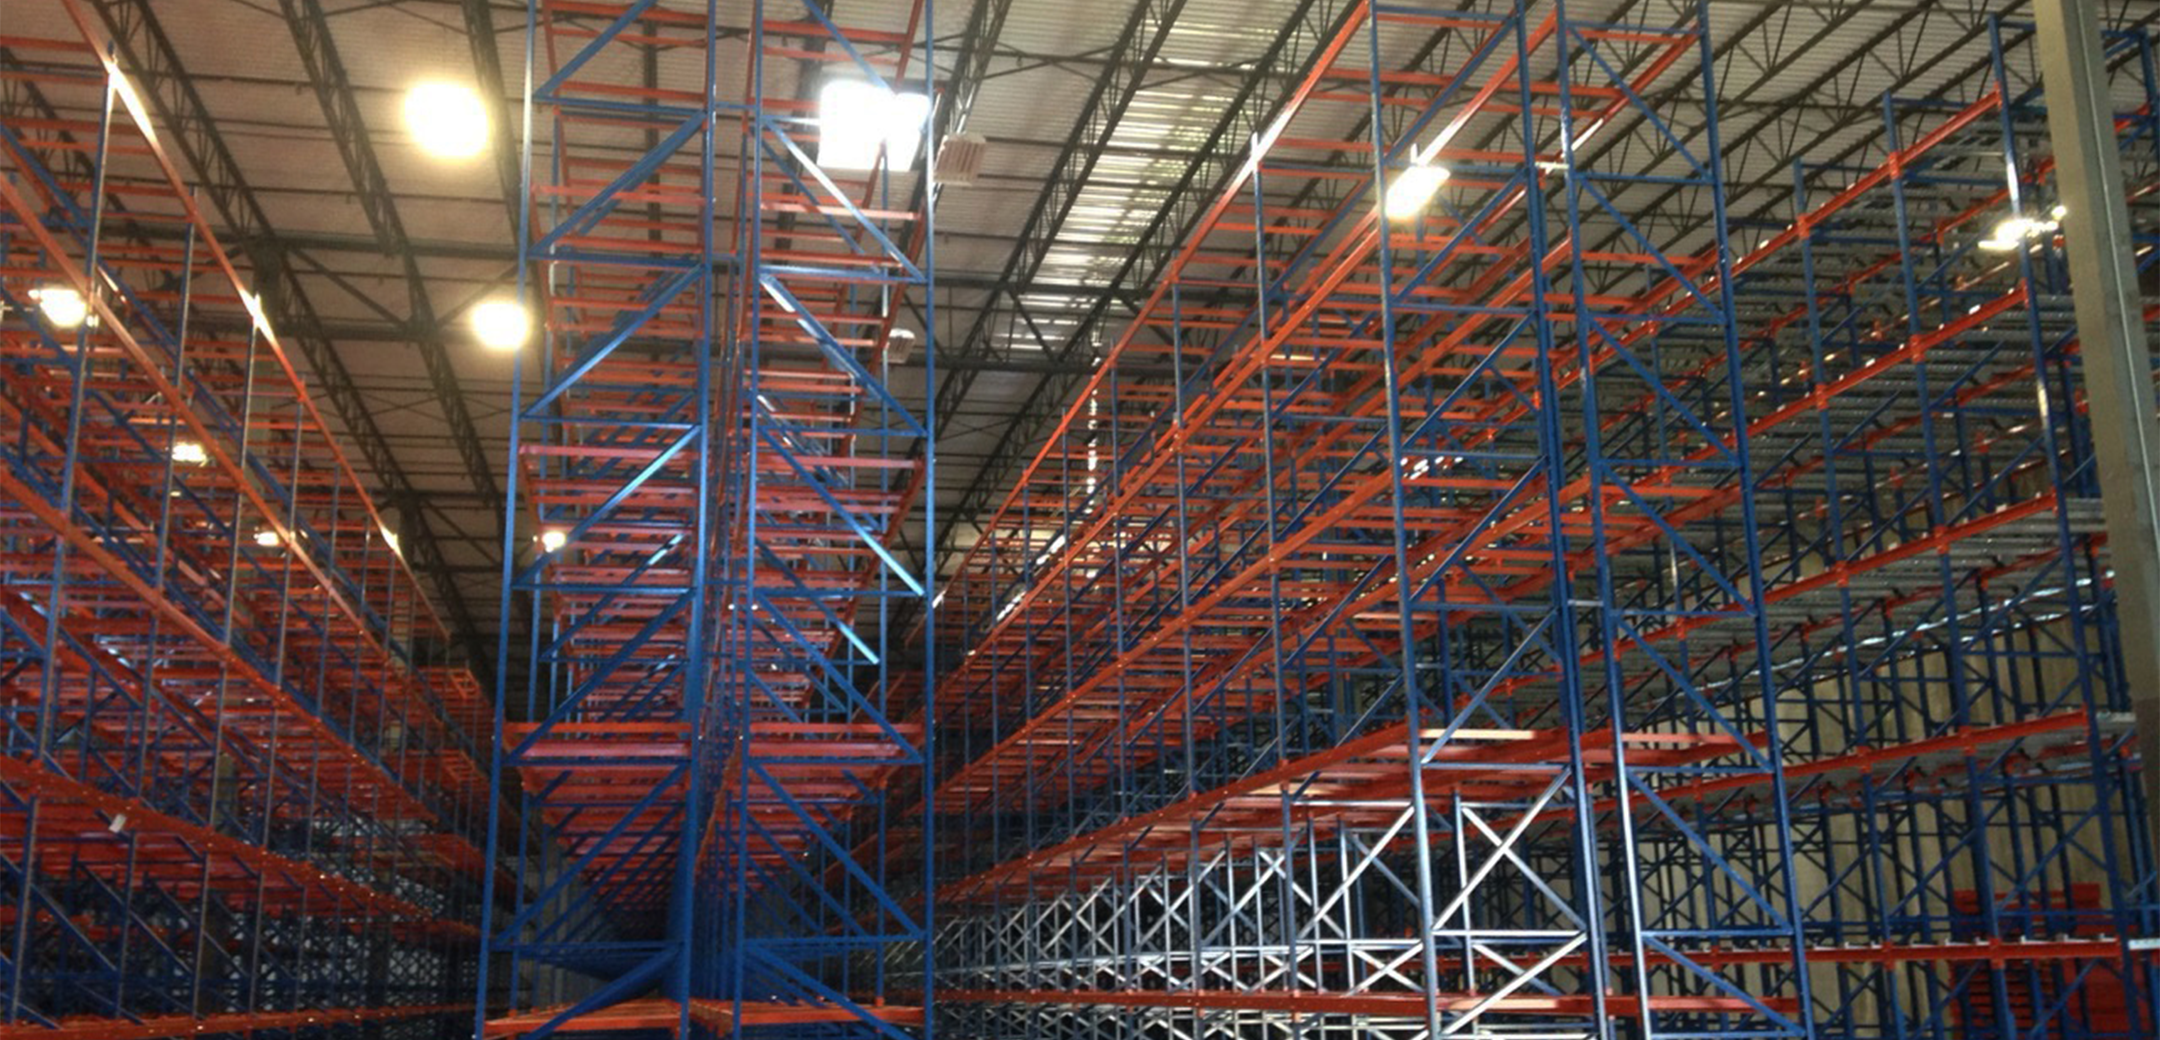 An interior view of the South Washington Park warehouse showcasing the floor to ceiling empty blue and orange colored shelves stretching into the back.